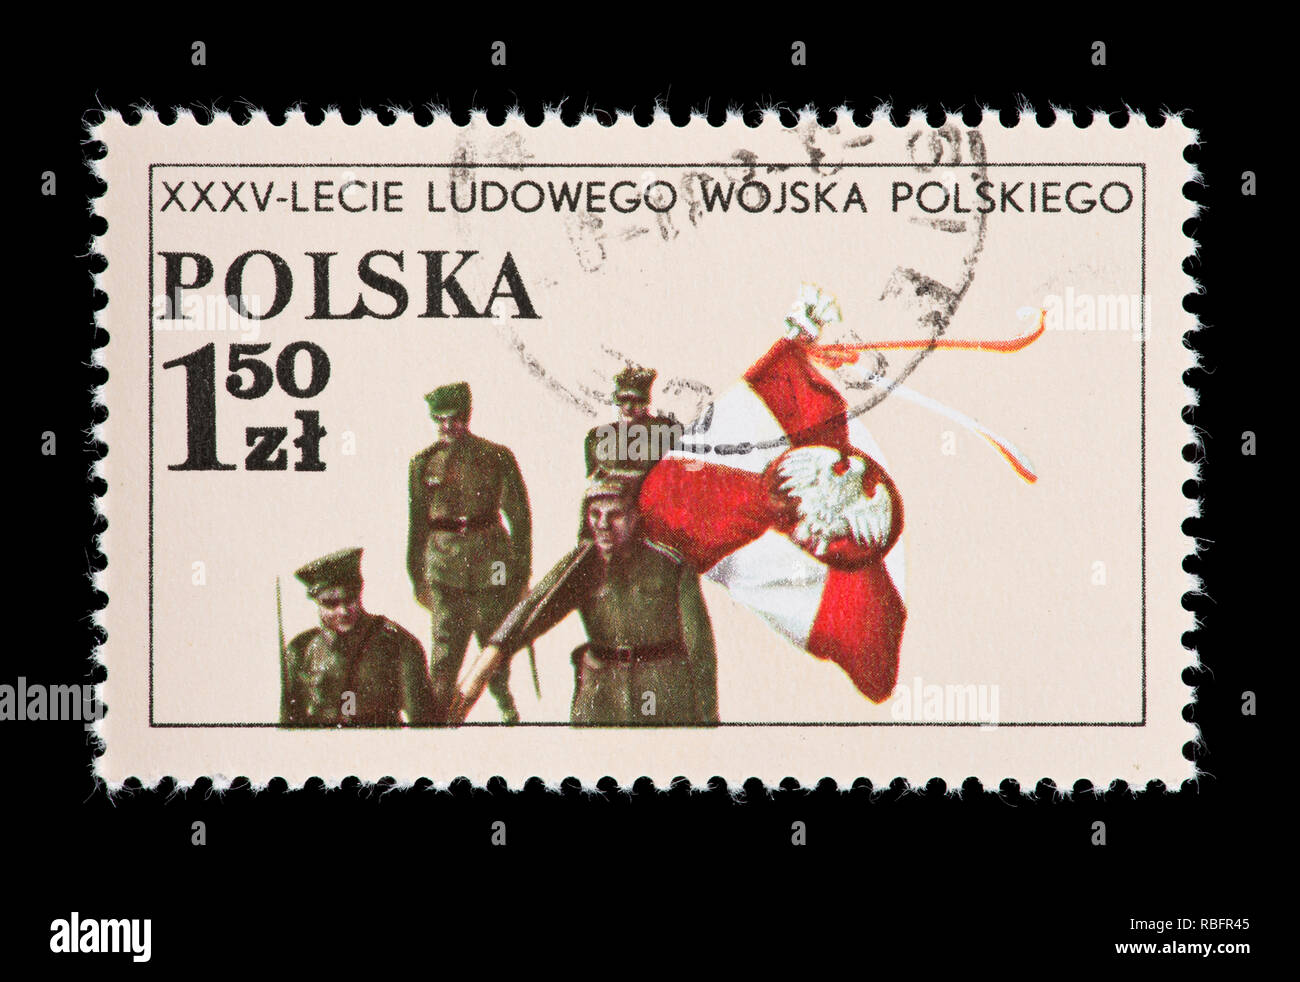 Postage stamp from Poland depicting the Color Guard of the Koszuisko Division, 35th anniversary of the People's Army. Stock Photo